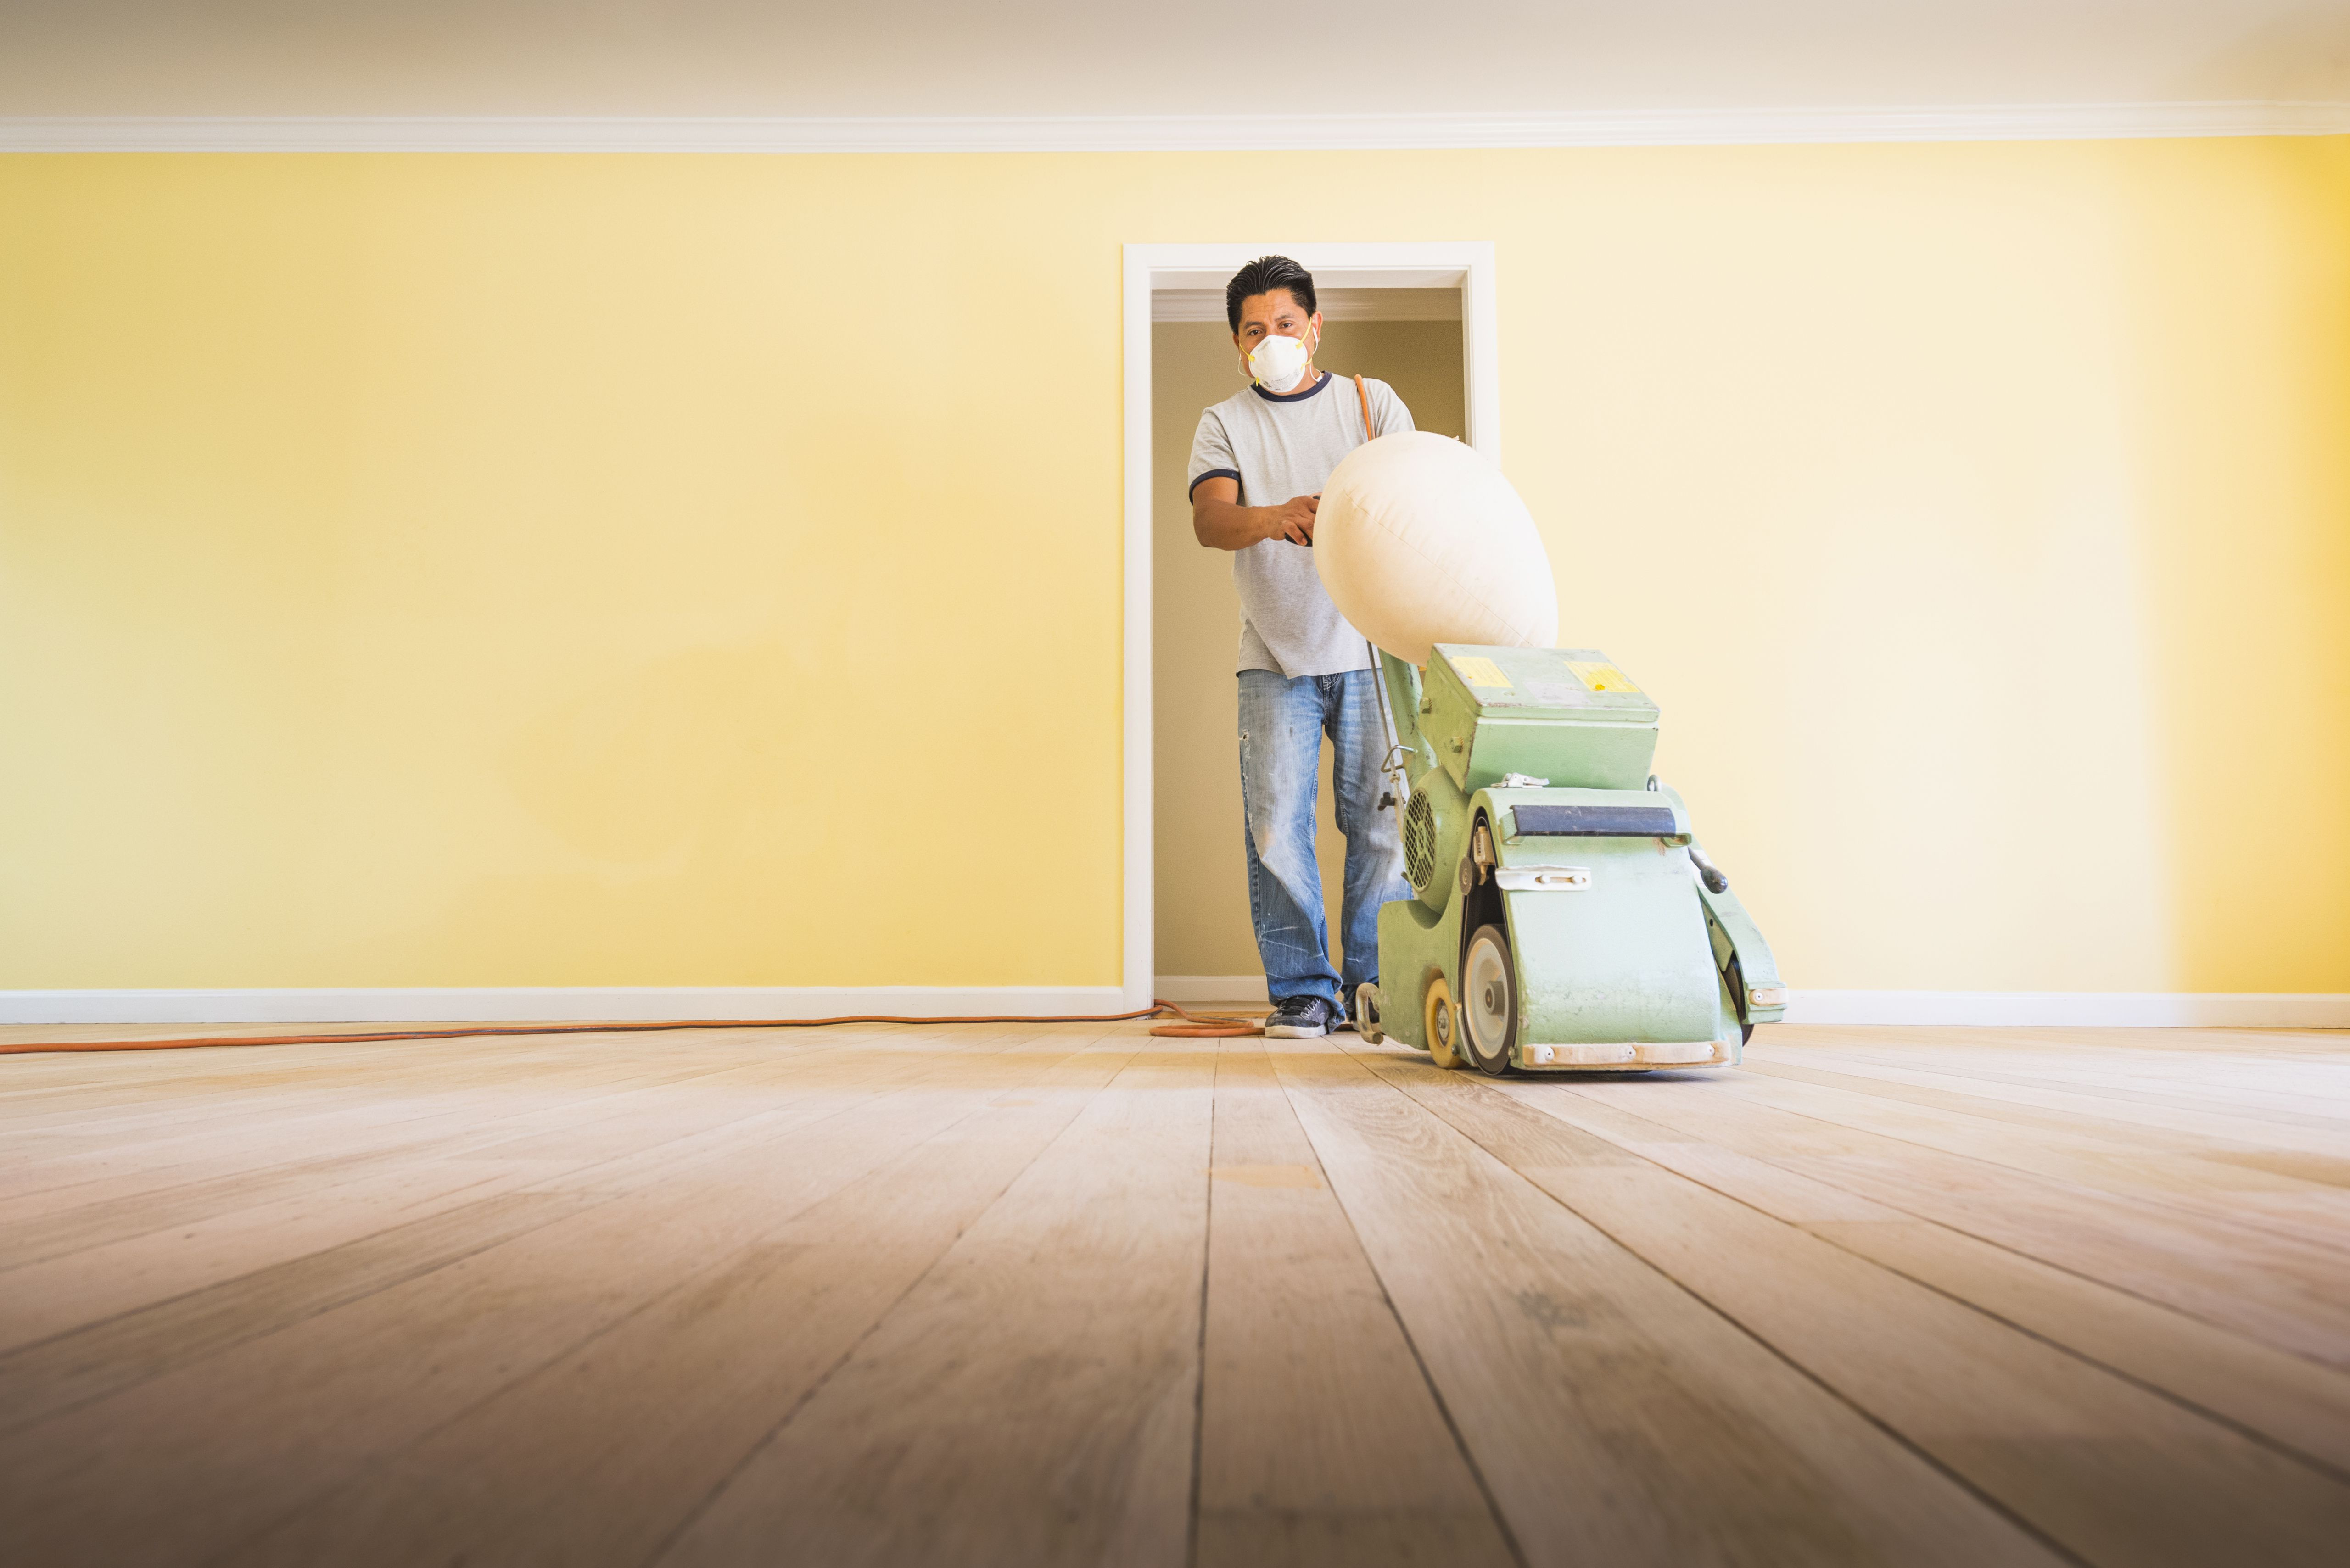 hardwood floor colors for 2017 of should you paint walls or refinish floors first pertaining to floorsandingafterpainting 5a8f08dfae9ab80037d9d878